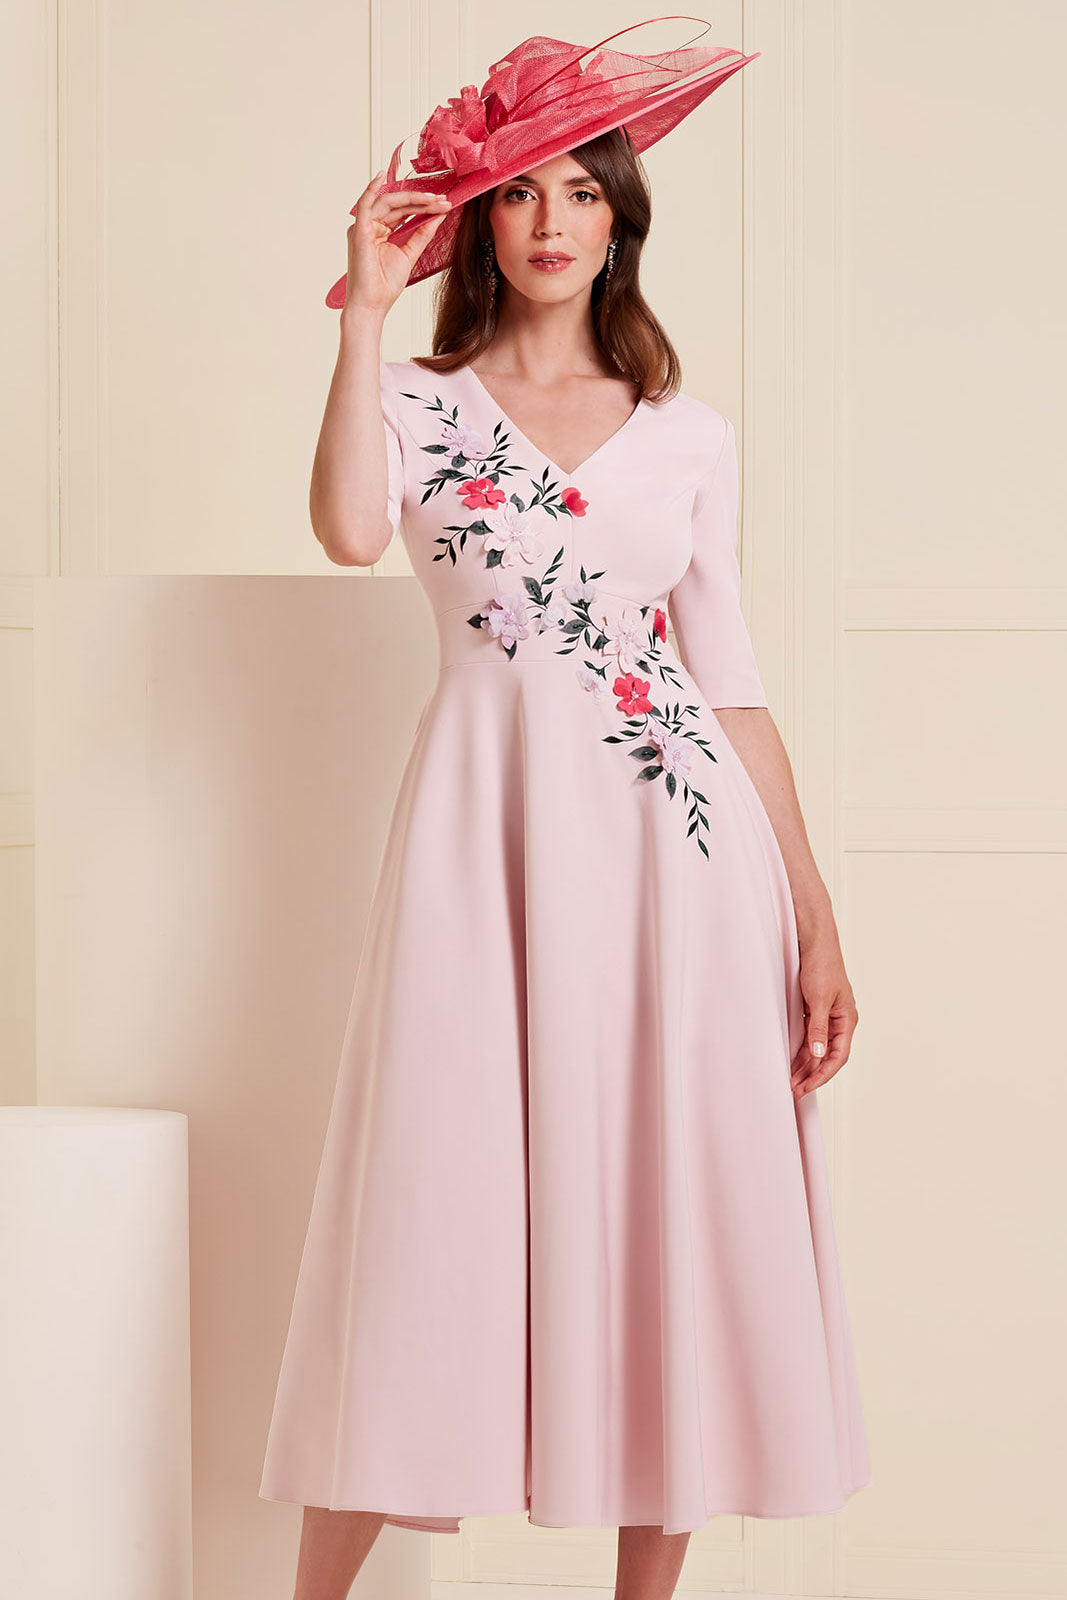 Blush Pink A-Line Dress with 3/4 Sleeve & Embroidered Flower Detail